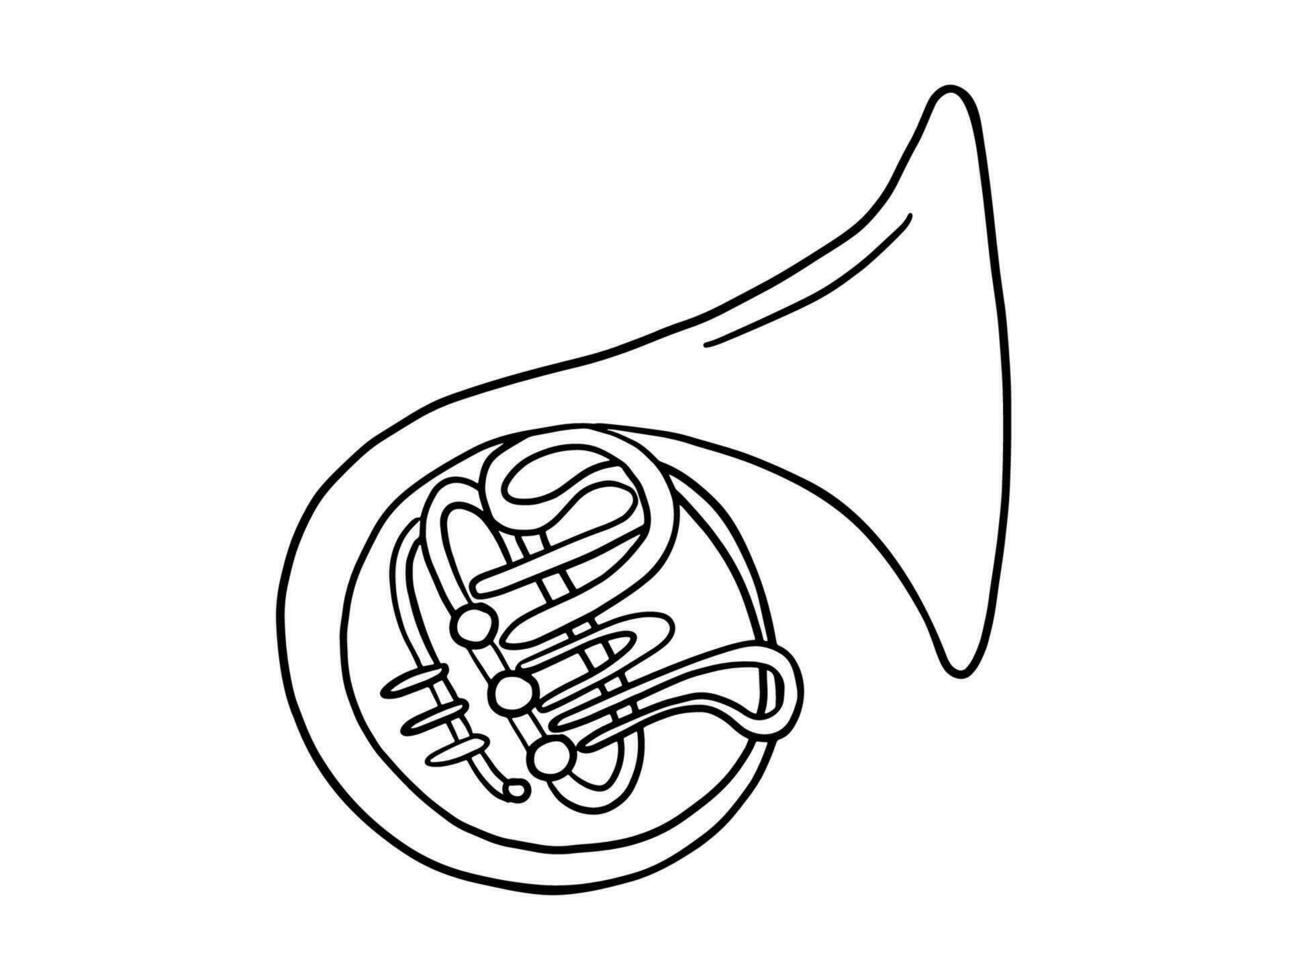 Doodle french horn illustration. Hand drawn brass trumpet icon. Vector musical instrument isolated on white